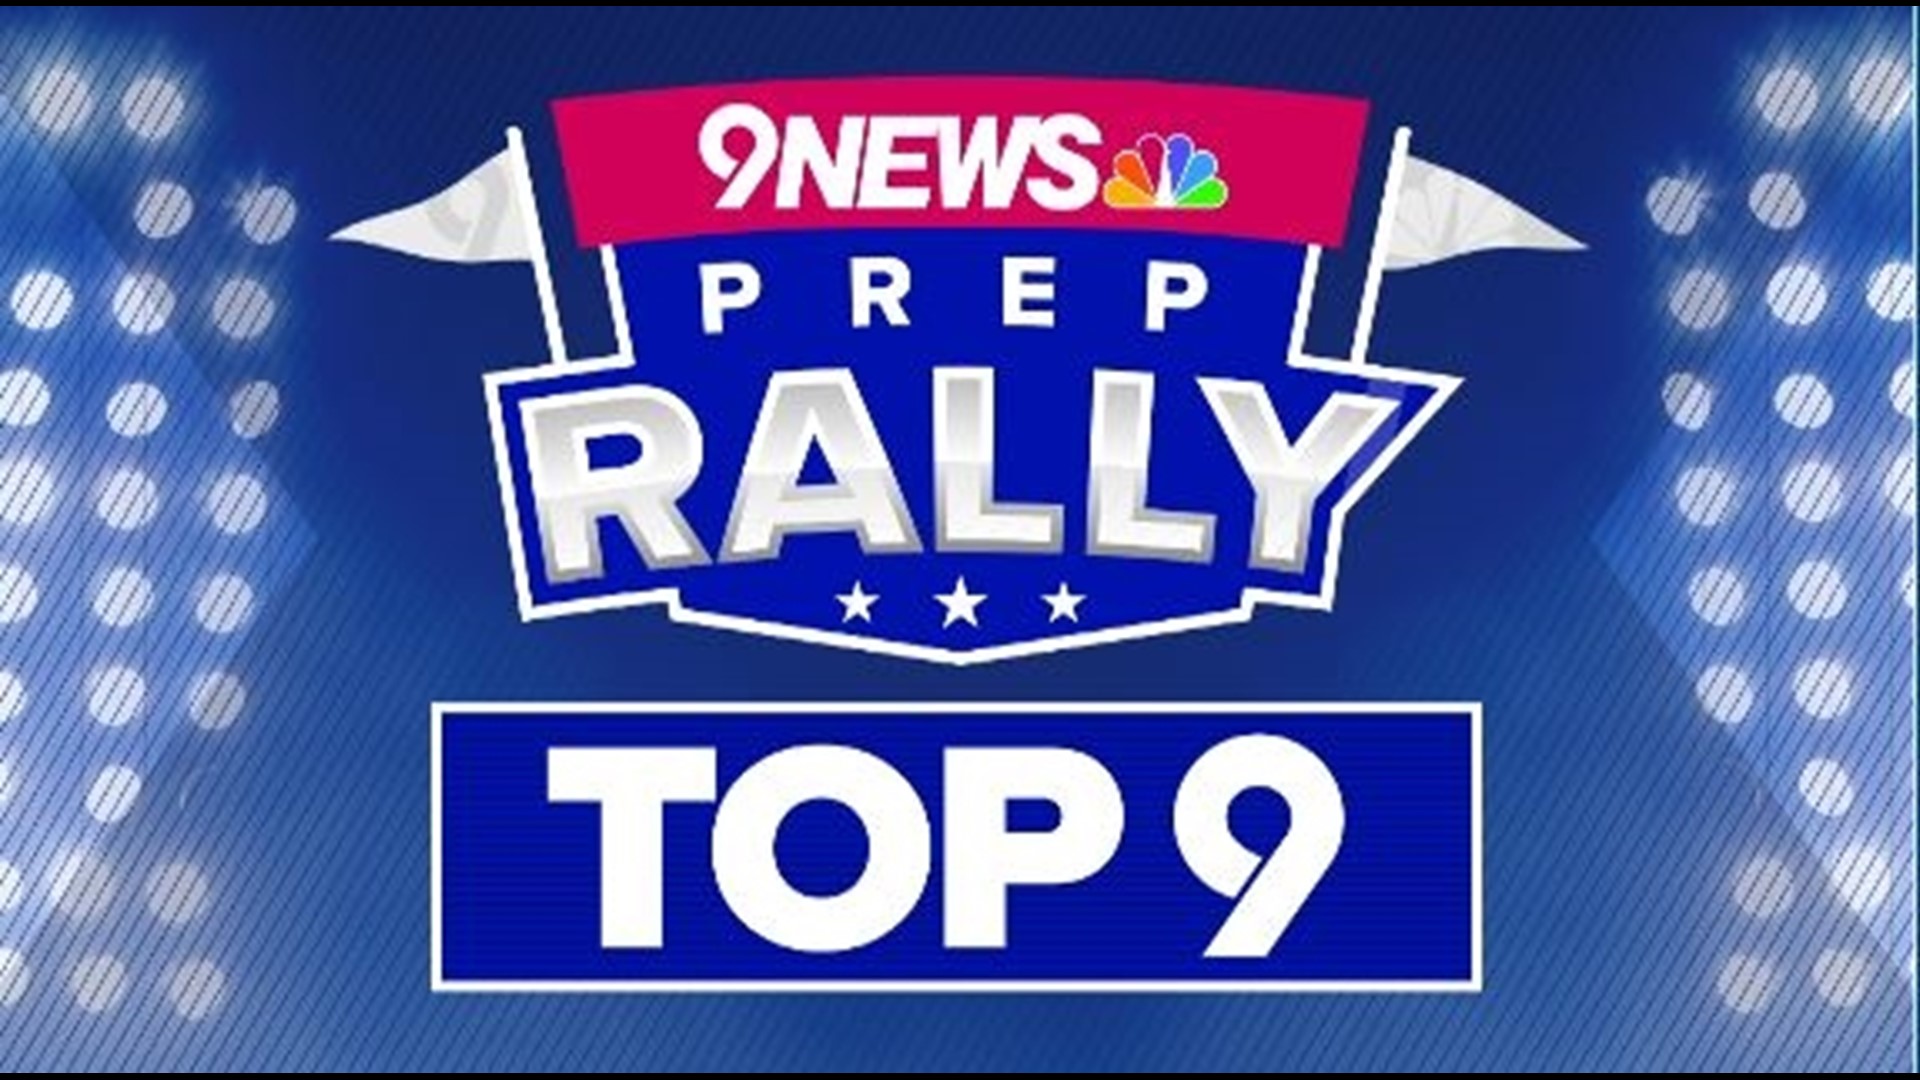 Check out the top plays the 9Preps team caught over the spring sports season, then vote for your favorite!